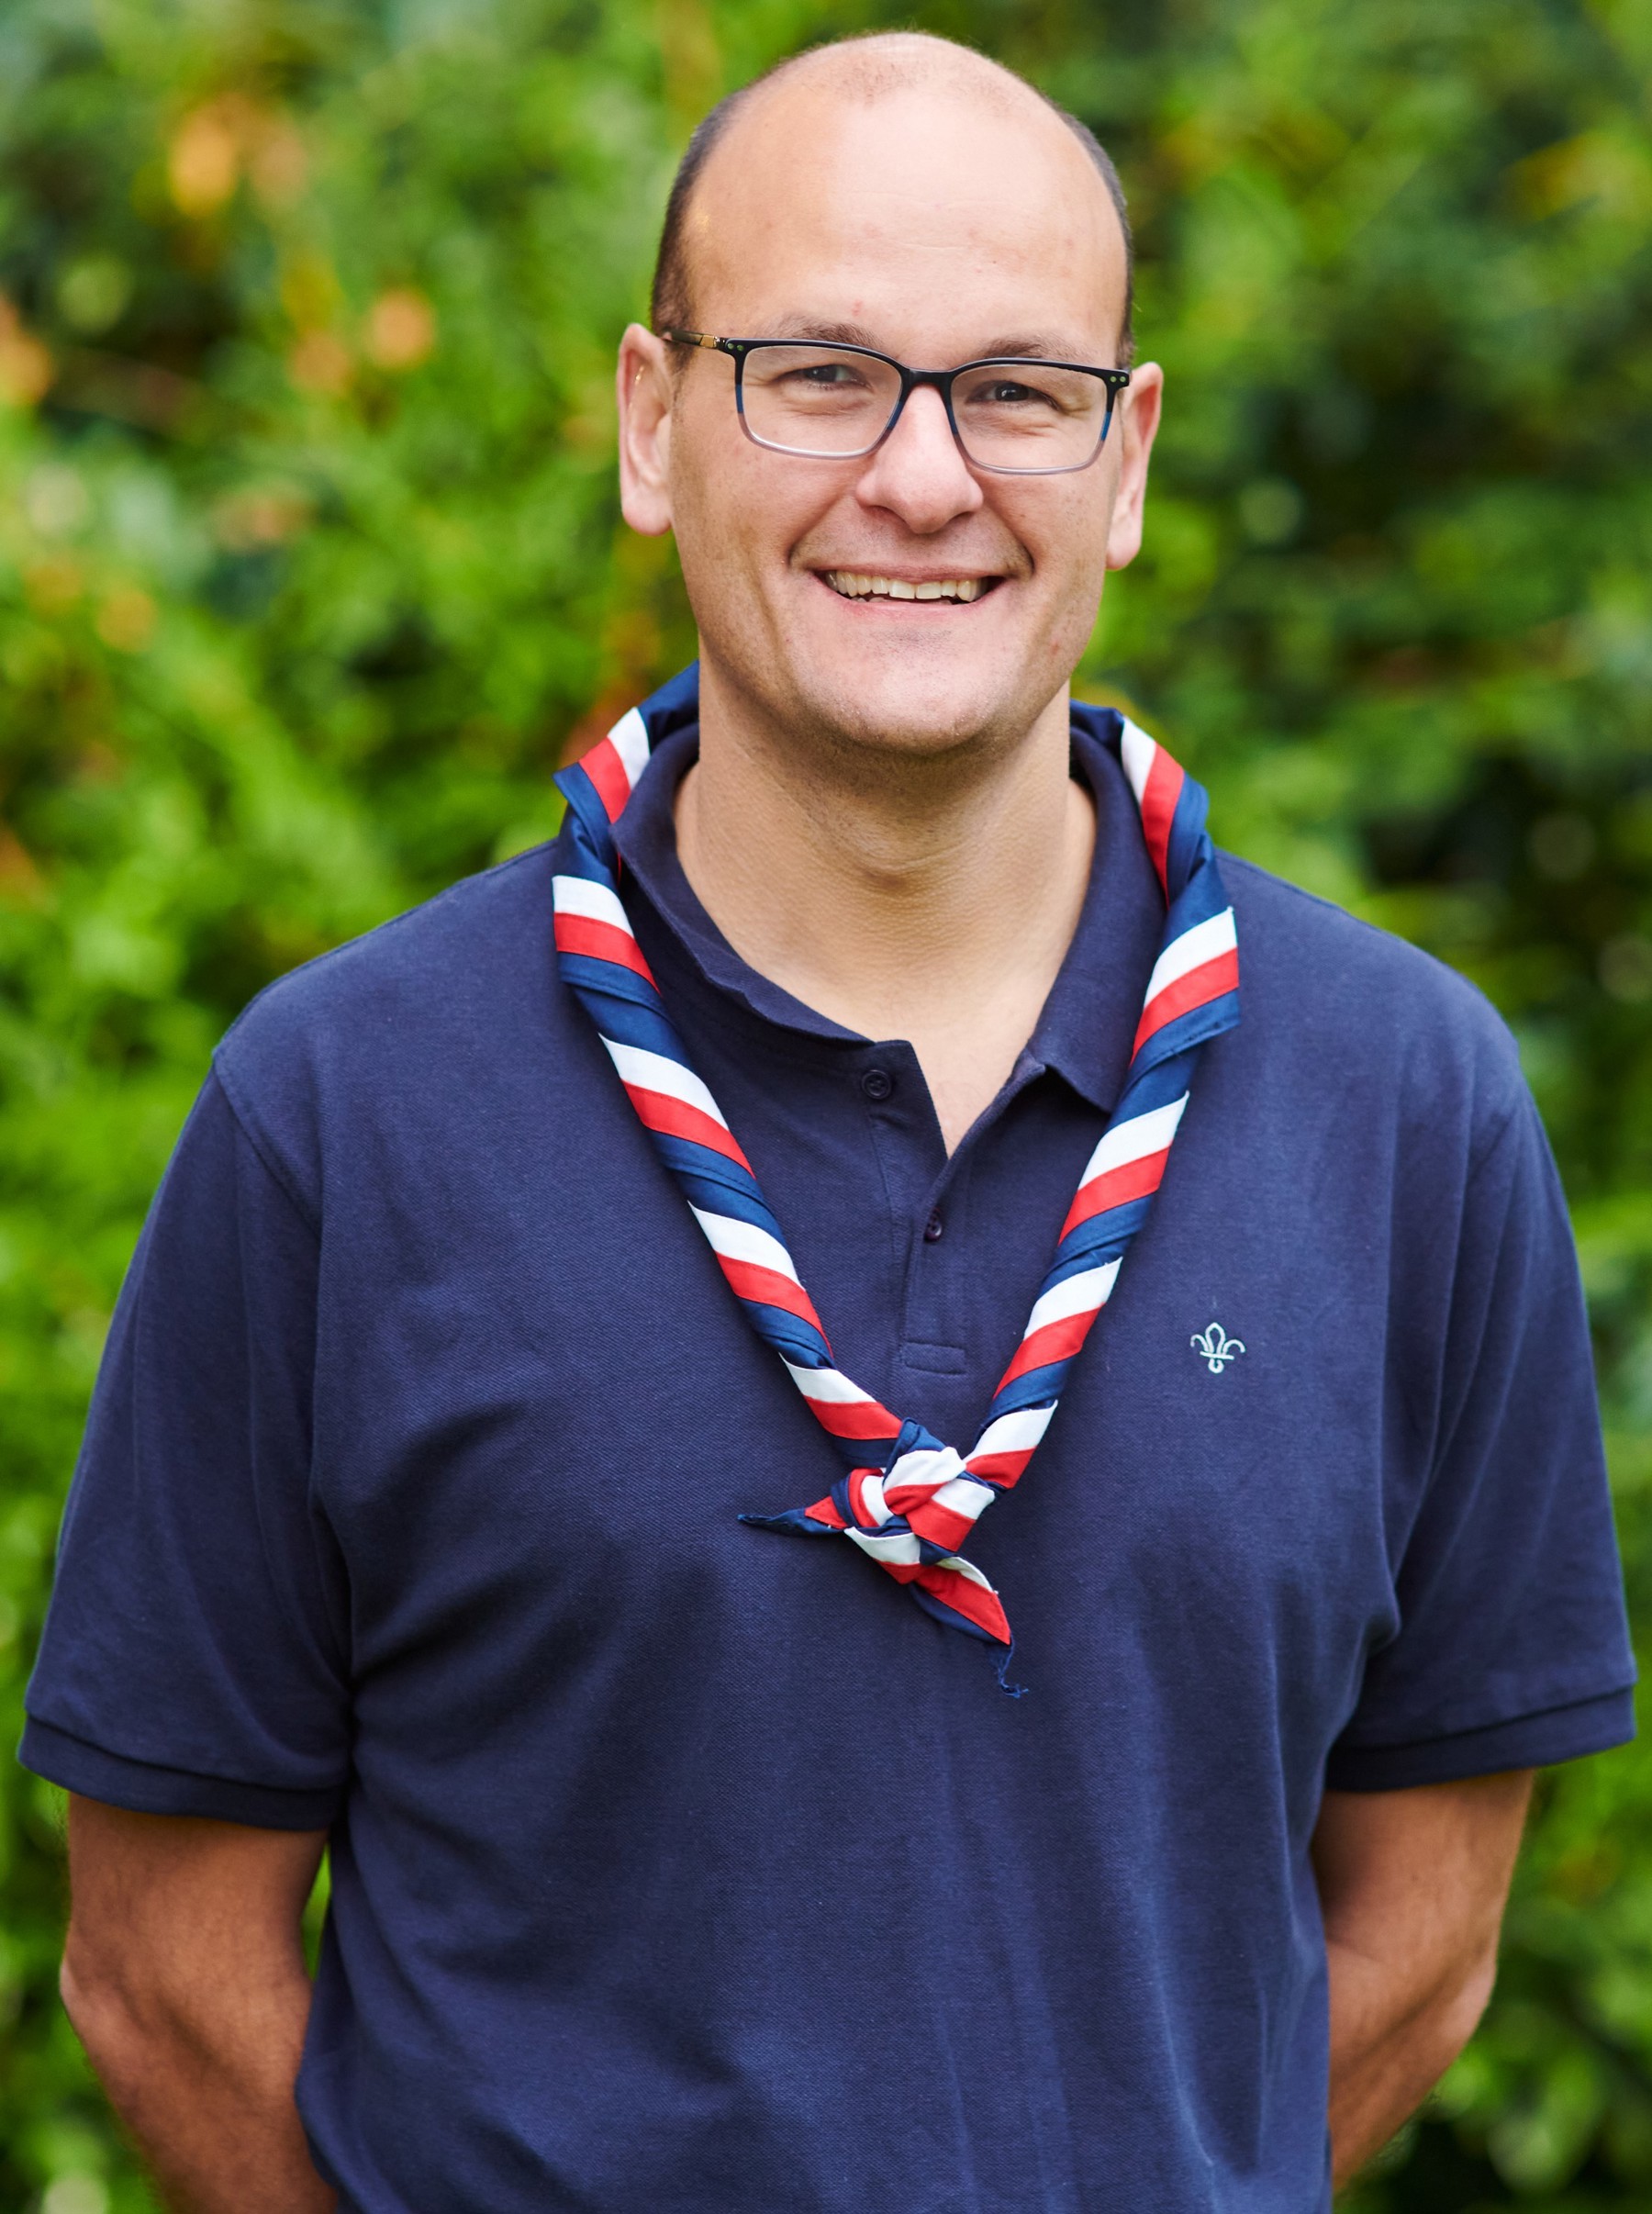 David Sandall smiling at the camera while wearing a navy Scouts polo shirt, glasses and stripy scarf